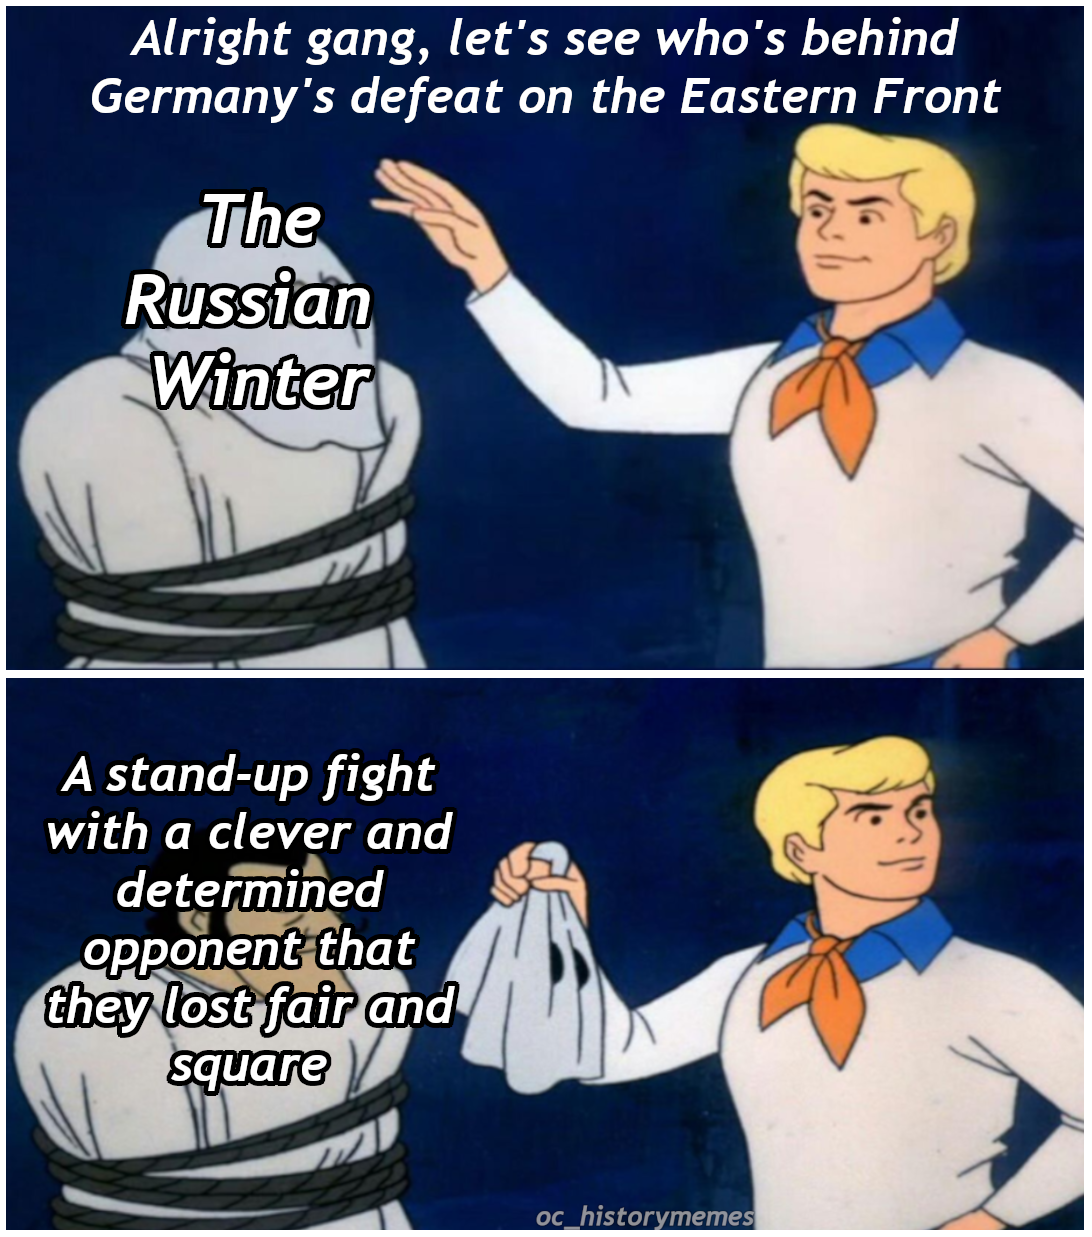 mandate system meme - Alright gang, let's see who's behind Germany's defeat on the Eastern Front The Russian Winter A standup fight with a clever and determined opponent that they lost fair and square oc historymemes